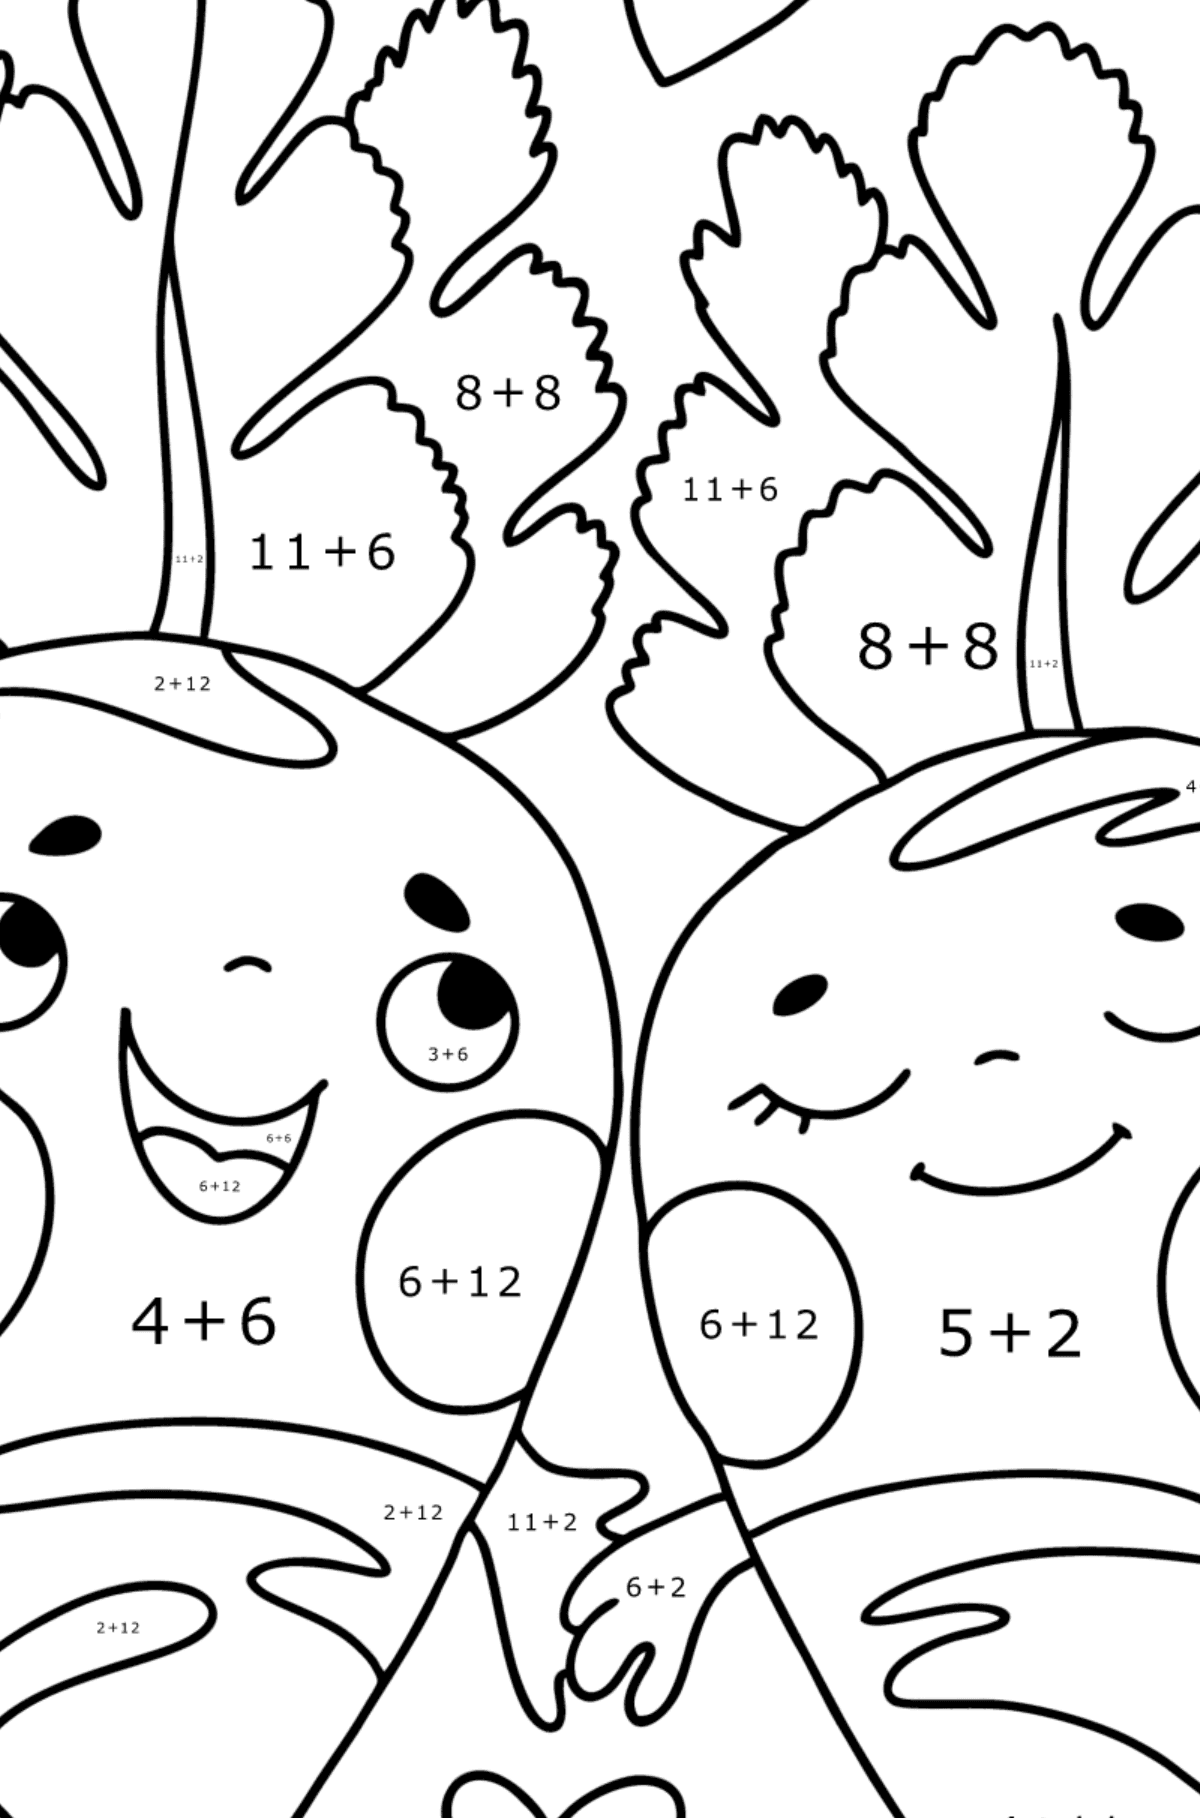 Carrots in love сolouring page - Math Coloring - Addition for Kids